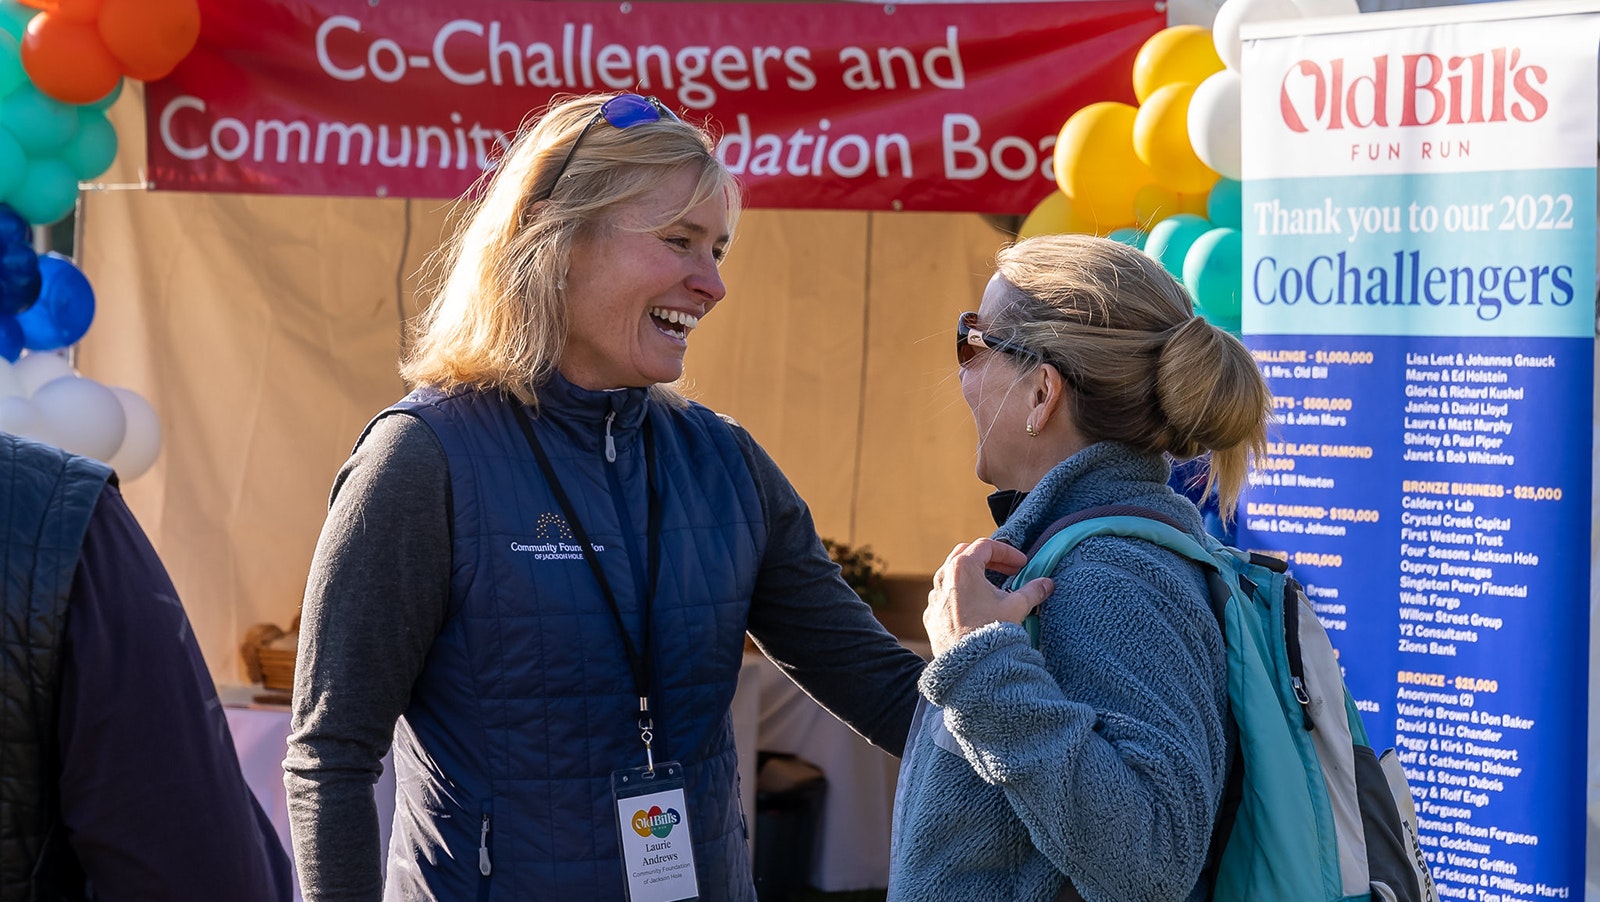 Community Foundation of Jackson Hole President Laurie Andrews has a laugh with someone at a previous Old Bills event.